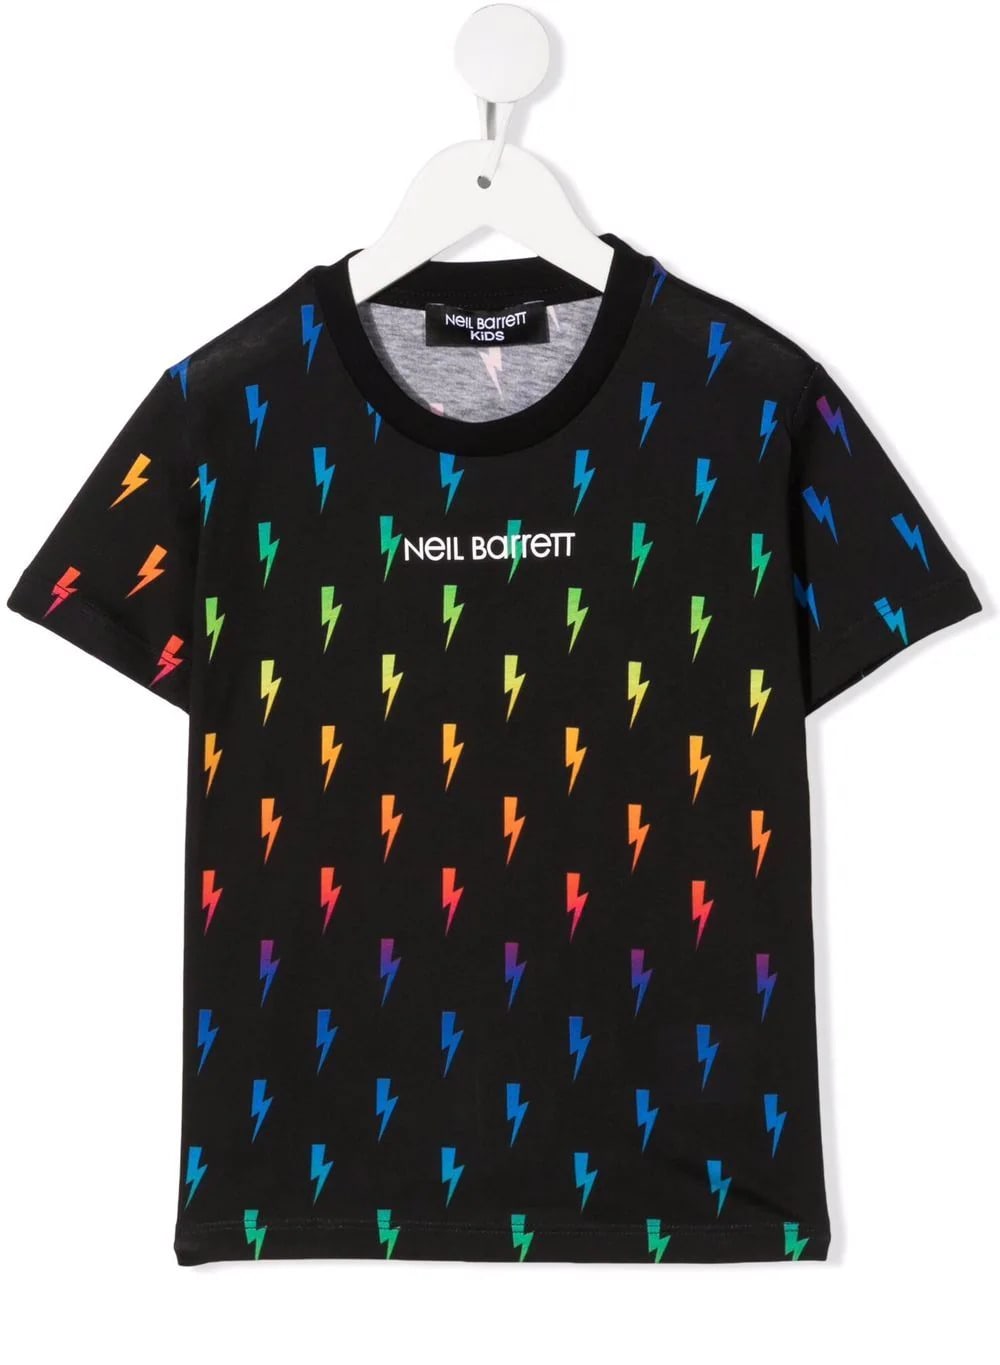 Neil Barrett Kids Black T-shirt With Logo And All-over Multicolored Thunderbolt Print